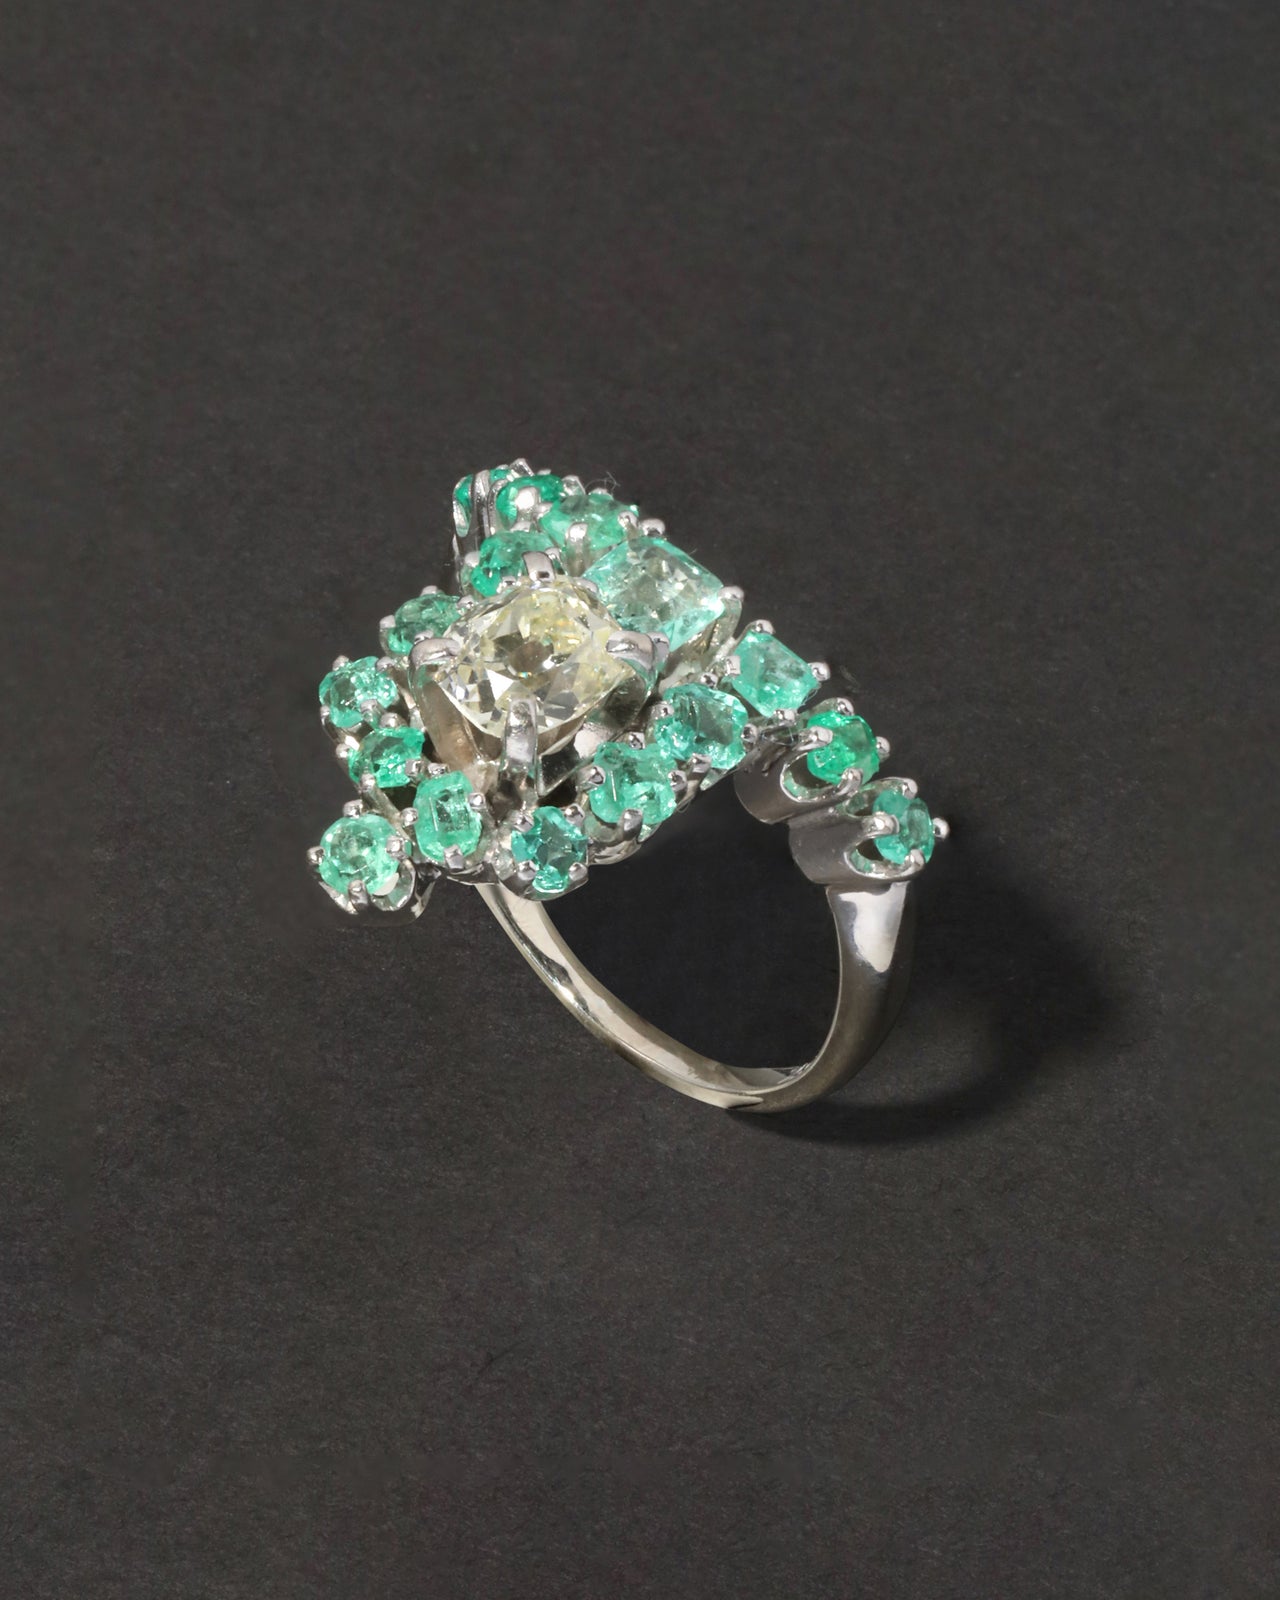 Vintage Art Deco Emerald and Diamond Ring in 18k White Gold - Photo 2